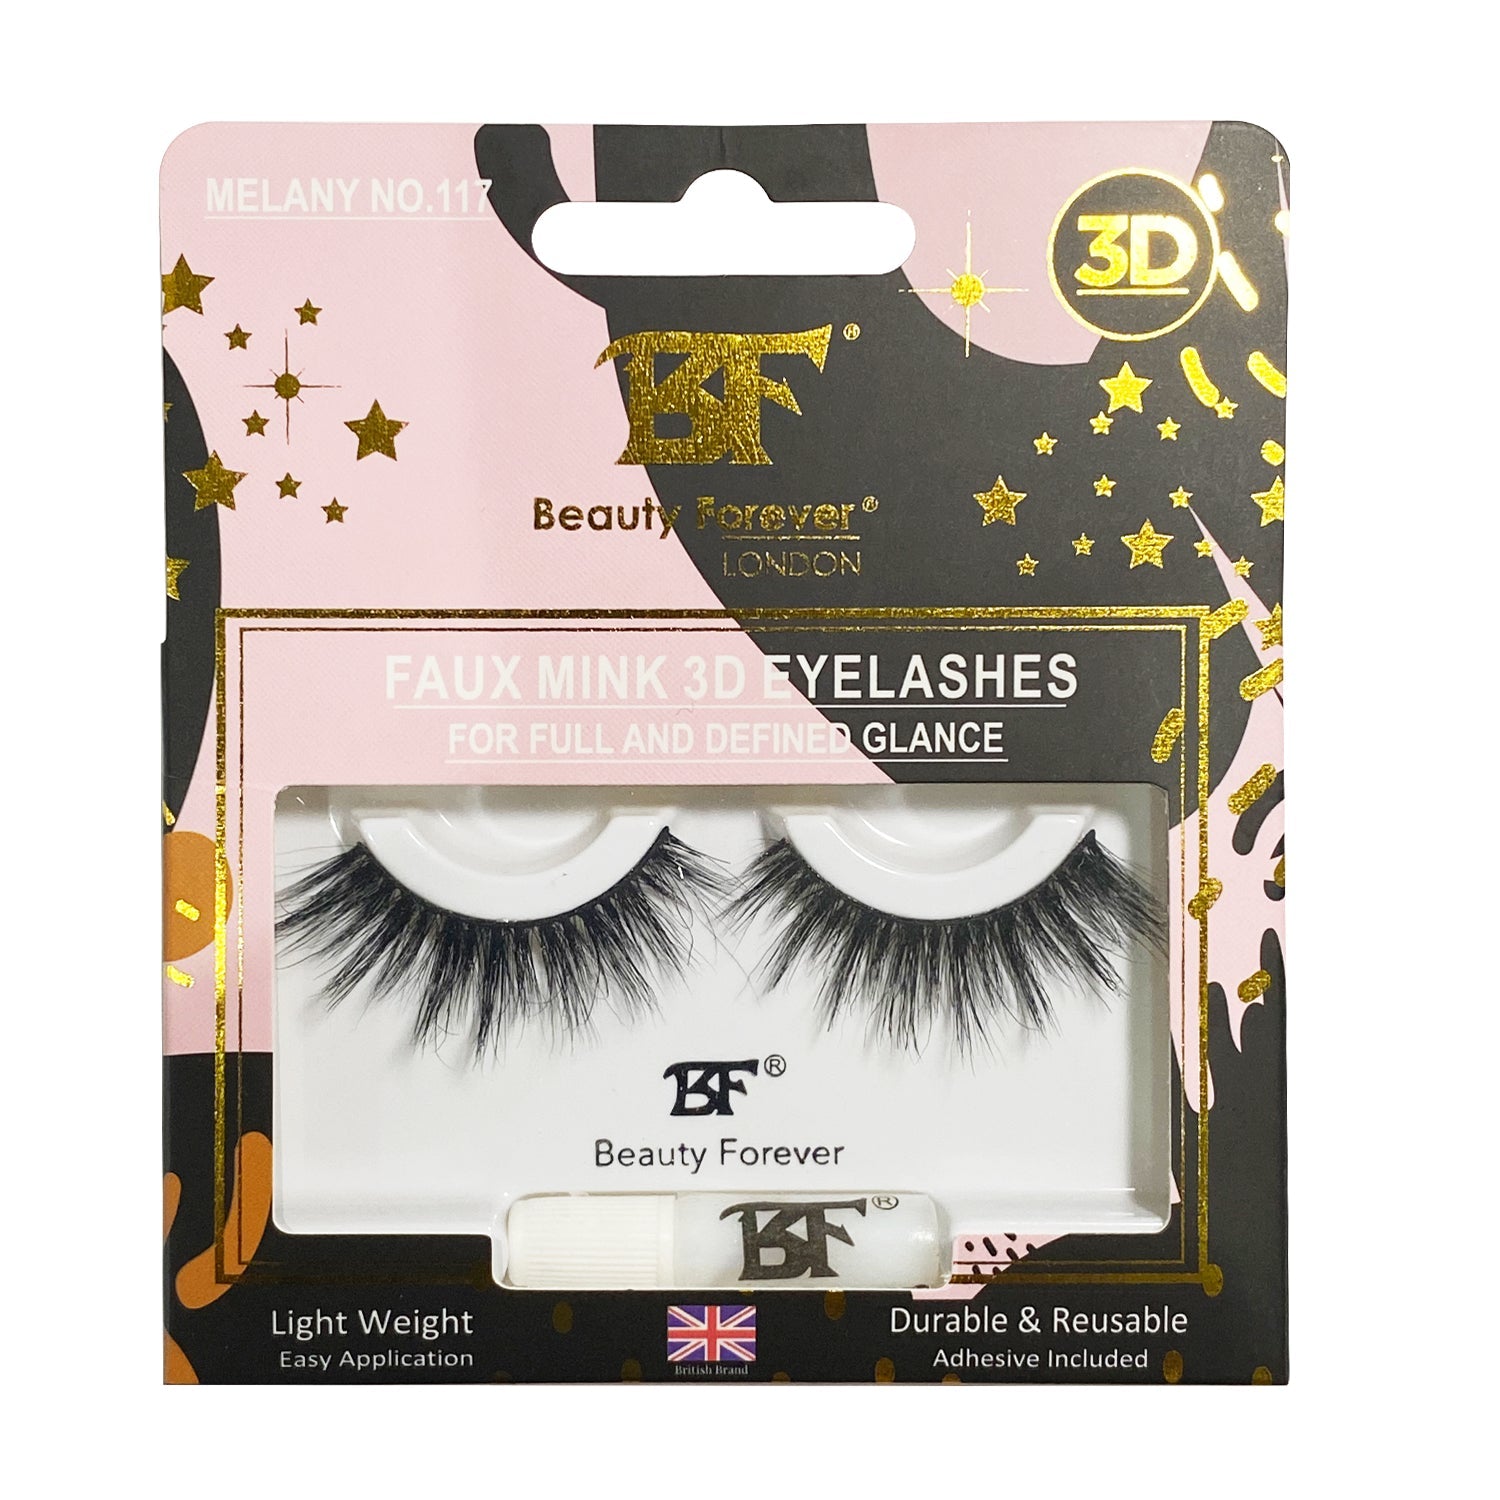 Faux Mink 3D Eyelashes No. 117 Melany (For full and defined glance) - Beauty Forever London